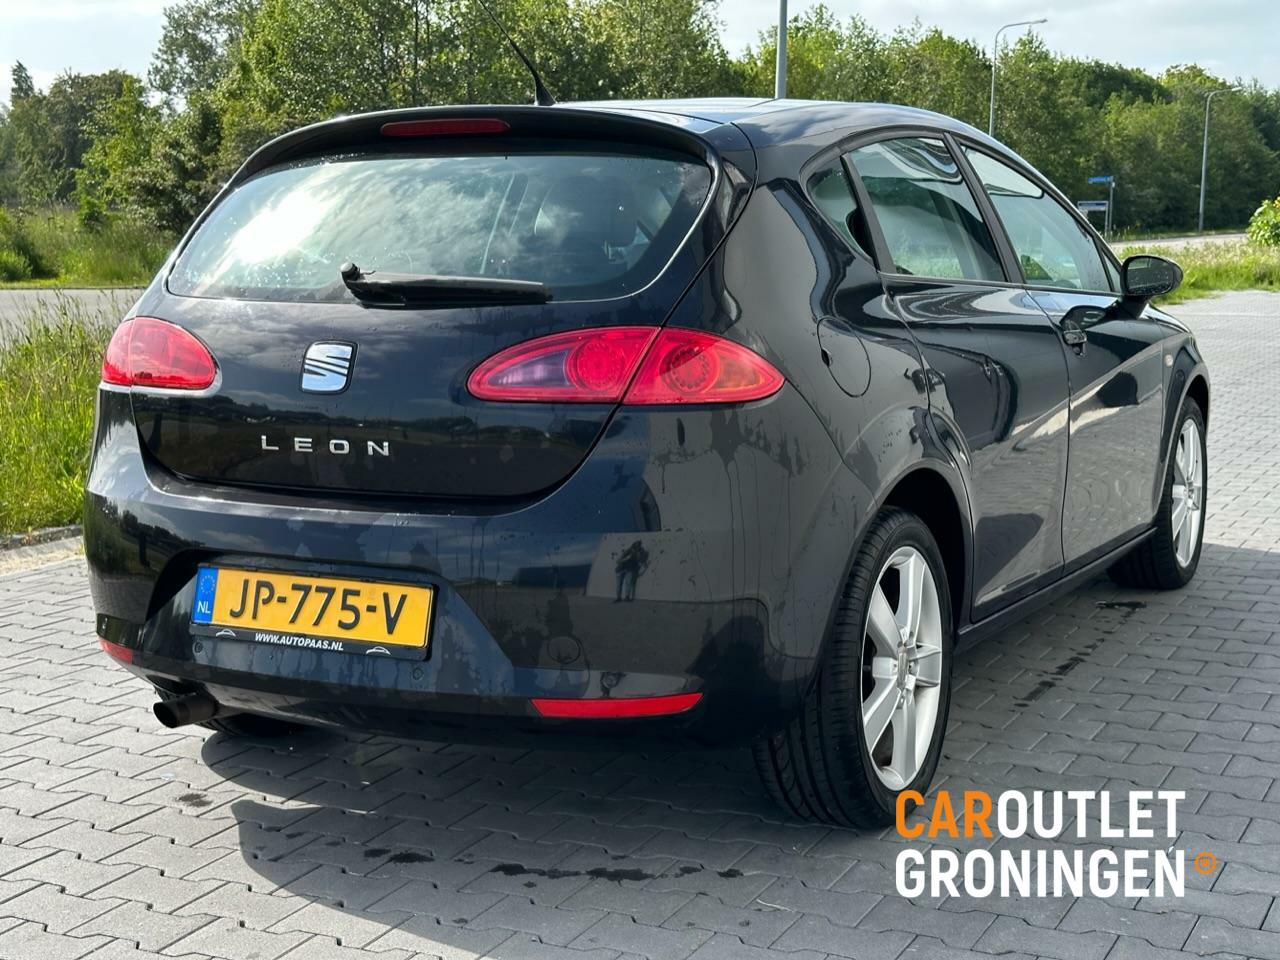 Caroutlet Groningen - Seat Leon 1.6 | 5-DRS | AIRCO | STOELVERW. | NWE APK